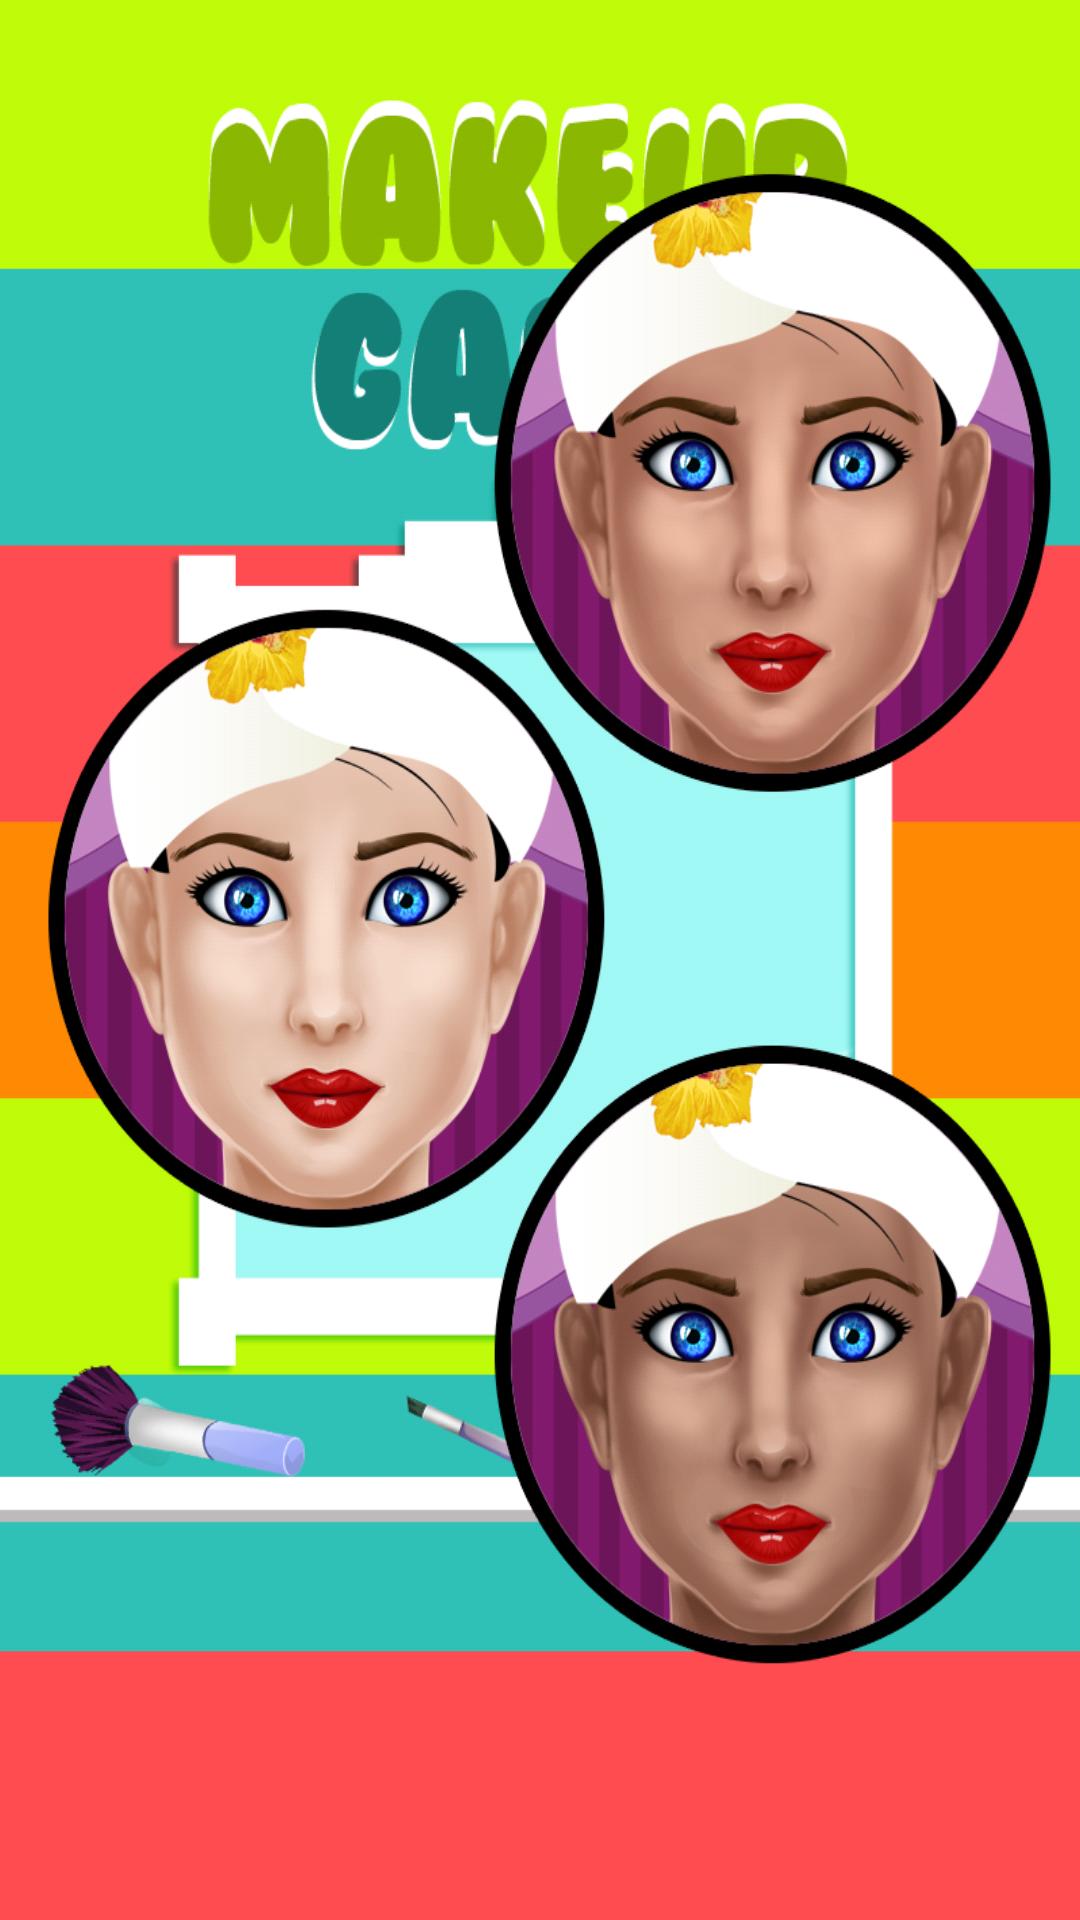 Makeup Games for Android - APK Download